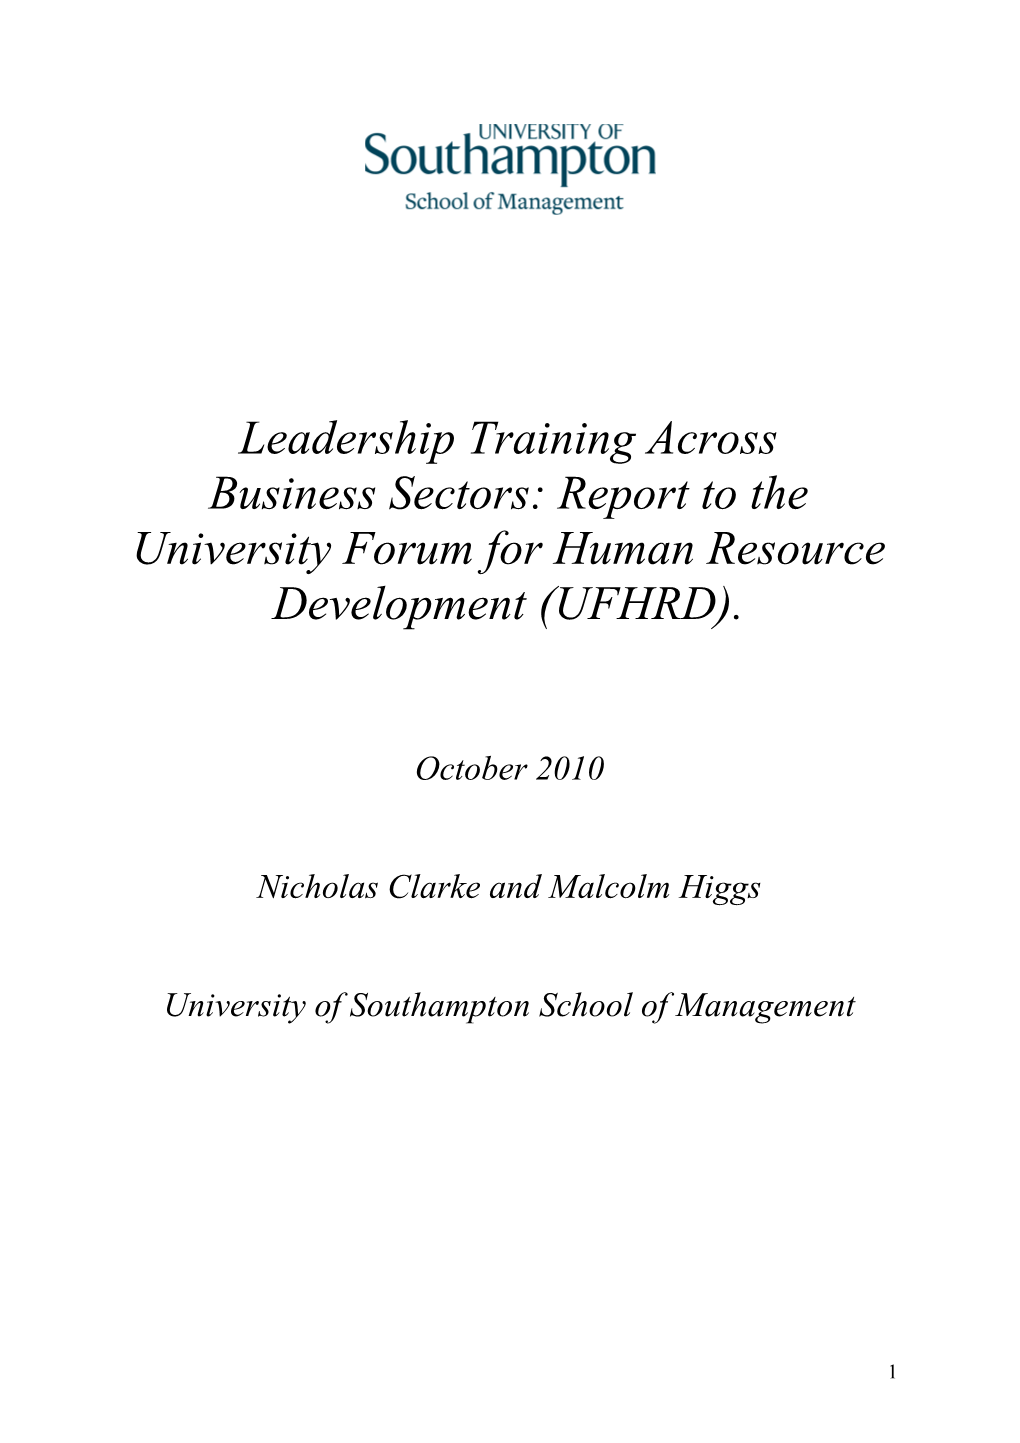 Business Sectors: Report to the University Forum for Human Resource Development (UFHRD) s1